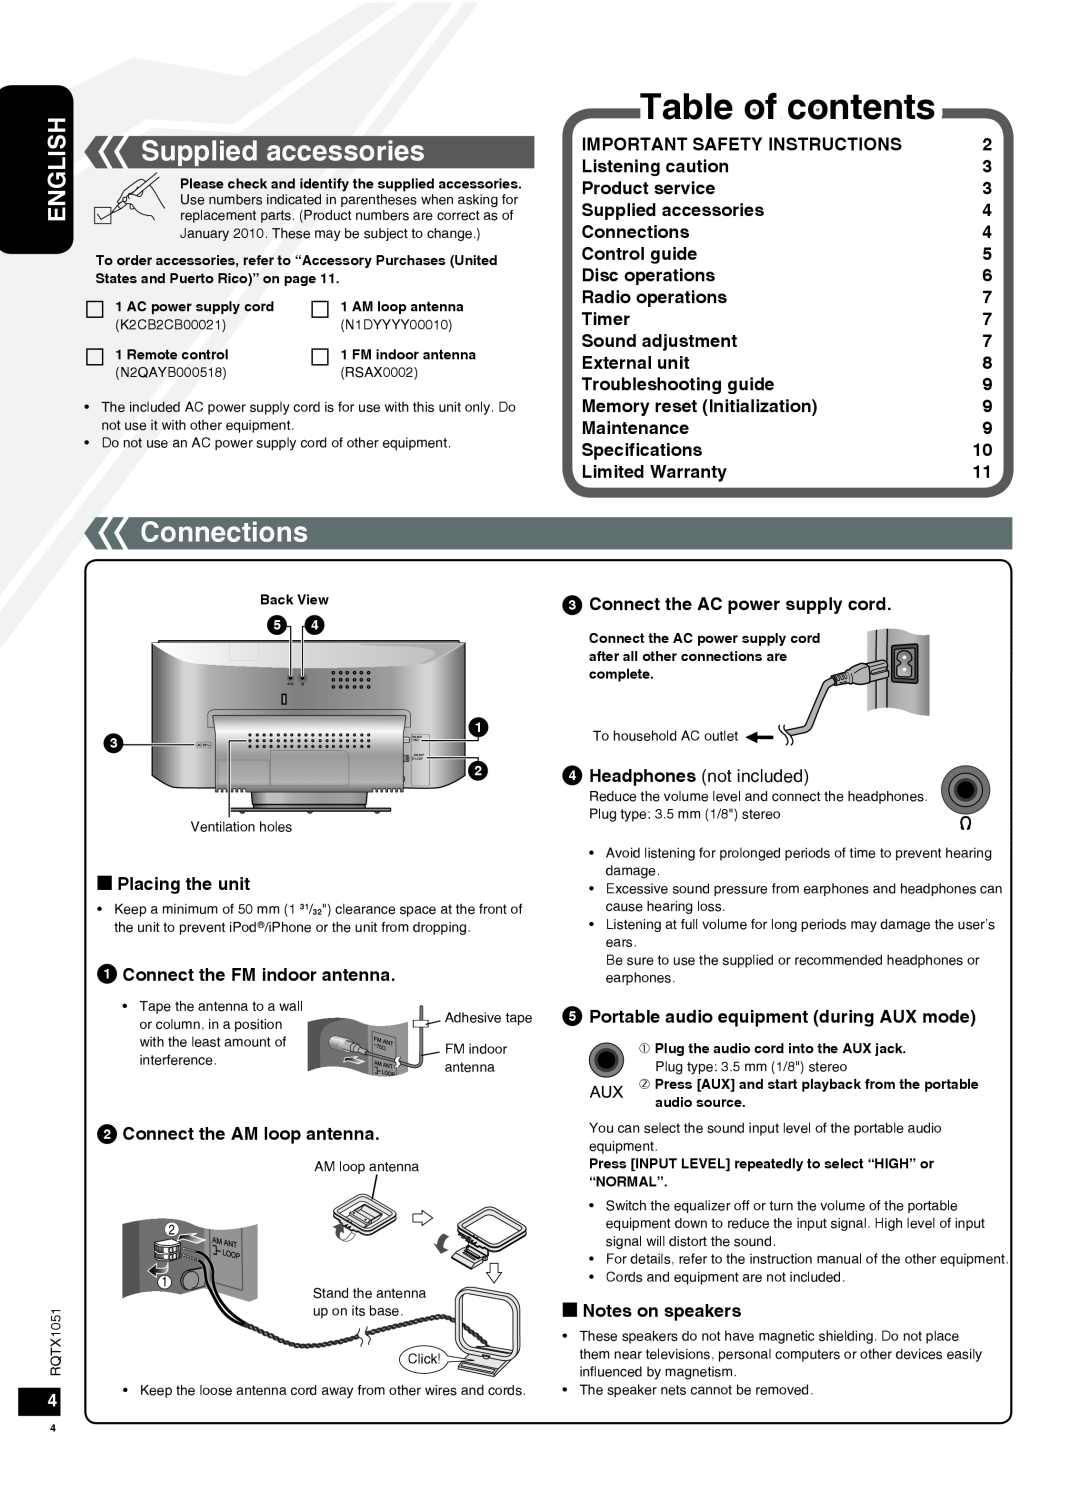 Panasonic SC-HC20 Table of contents, Supplied accessories, Connections, Important Safety Instructions, Listening caution 